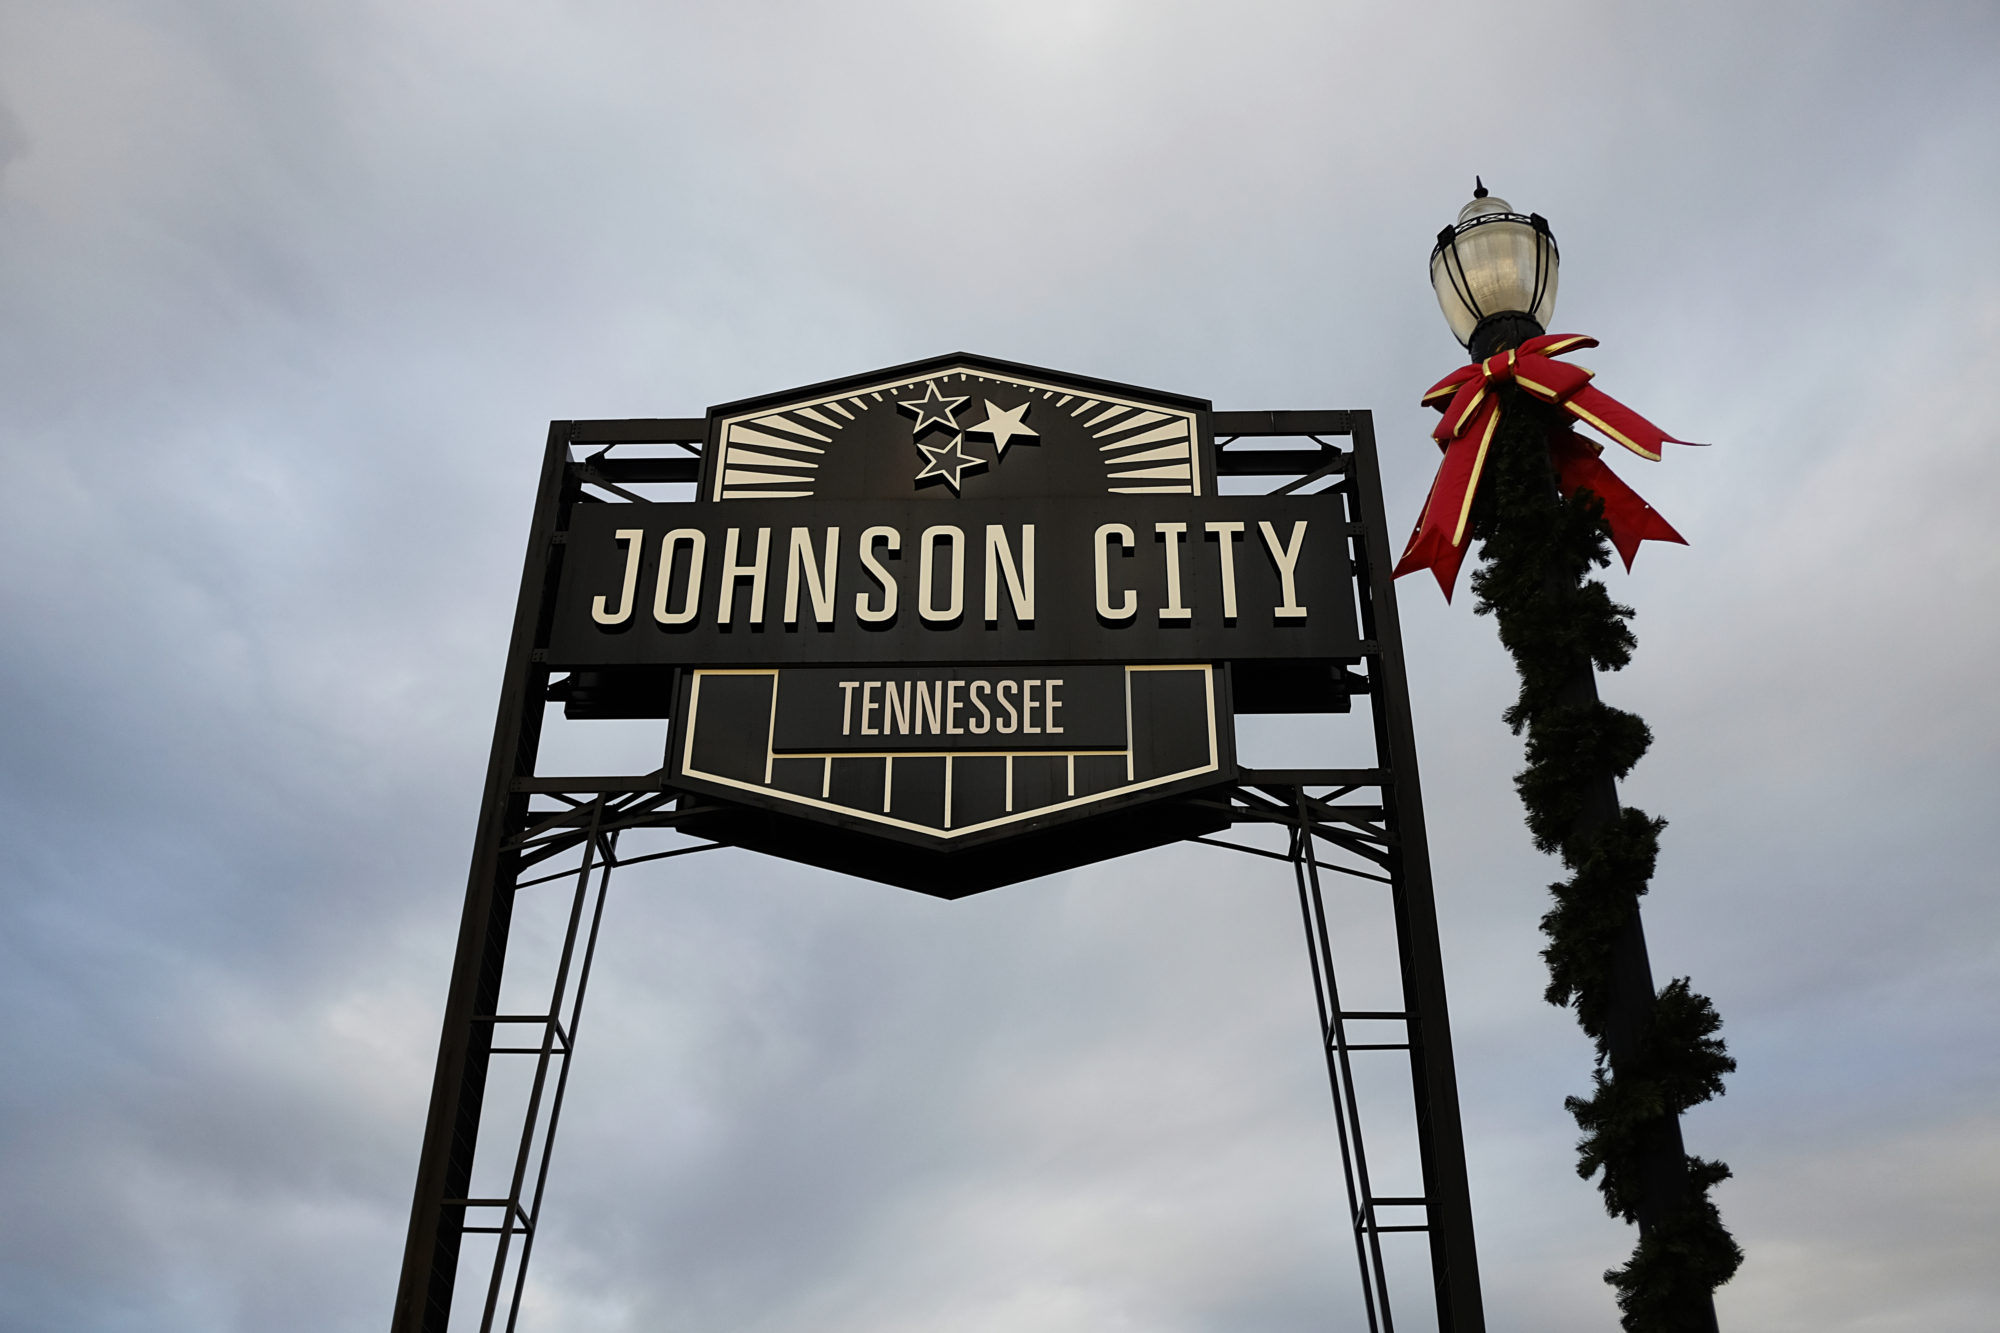 View of the Johnson City sign with a garland-wrapped light pole next to it